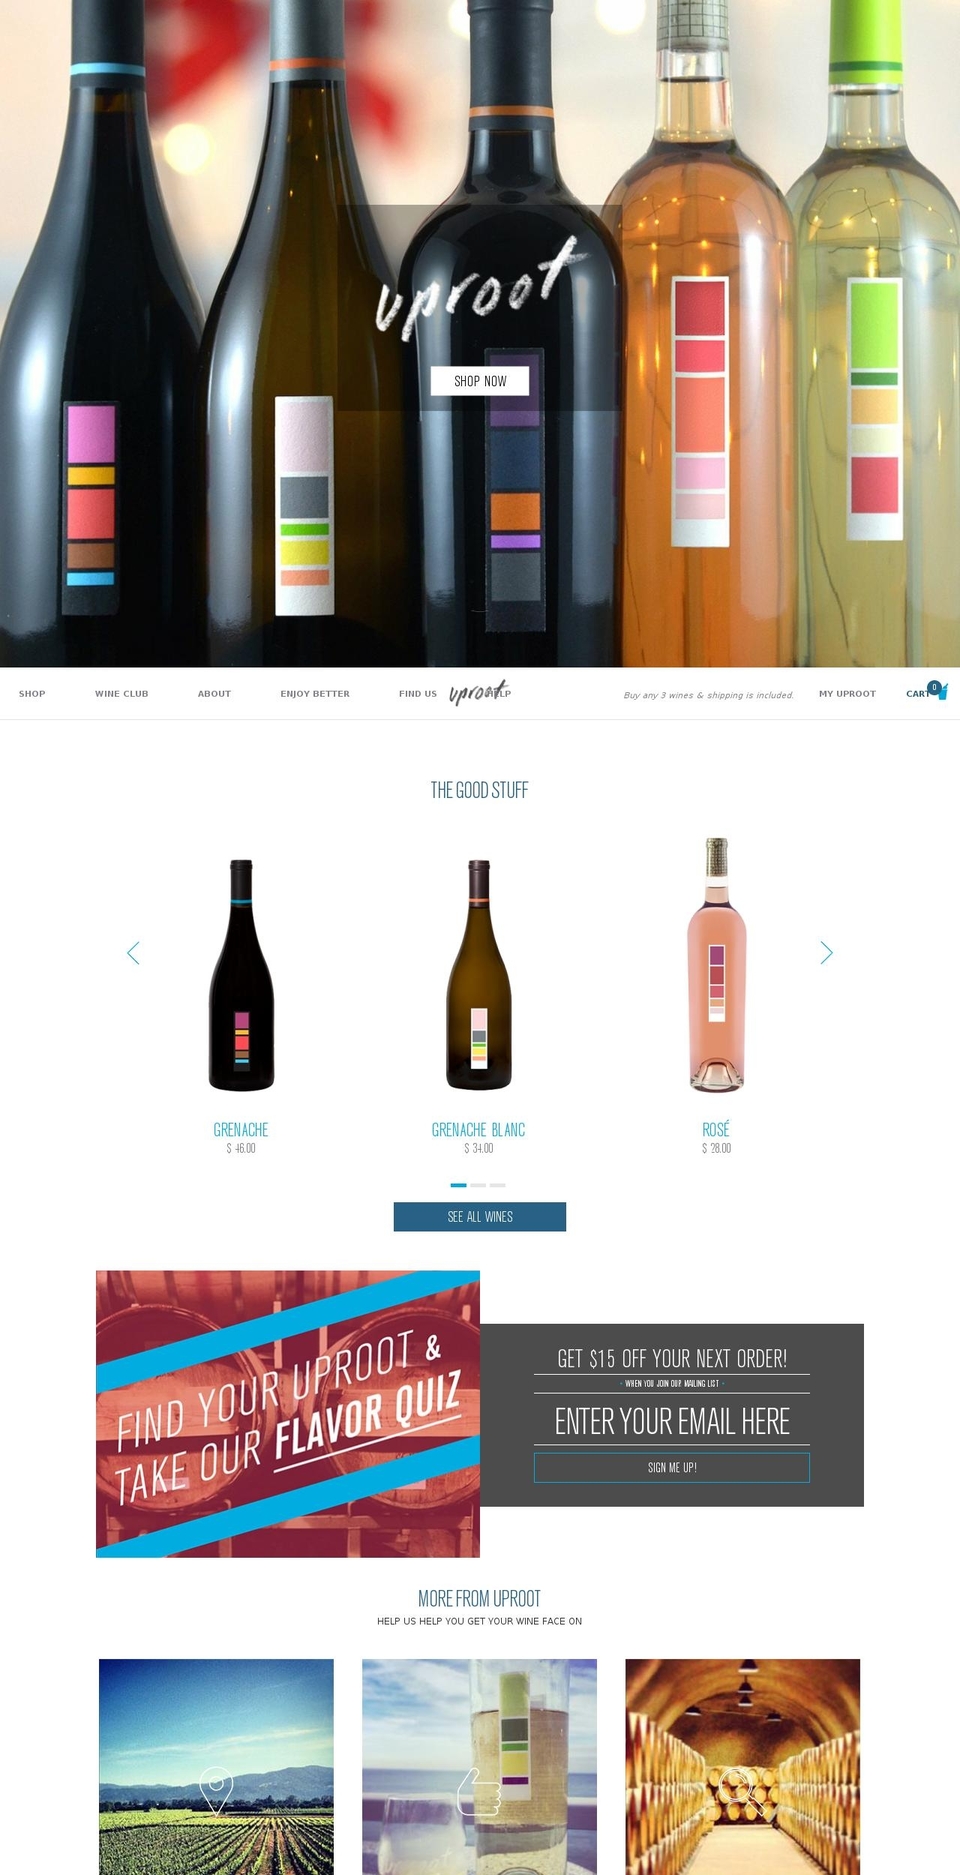 uproot-dev-myshopify-com-vpvuproot Shopify theme site example uproot.wine